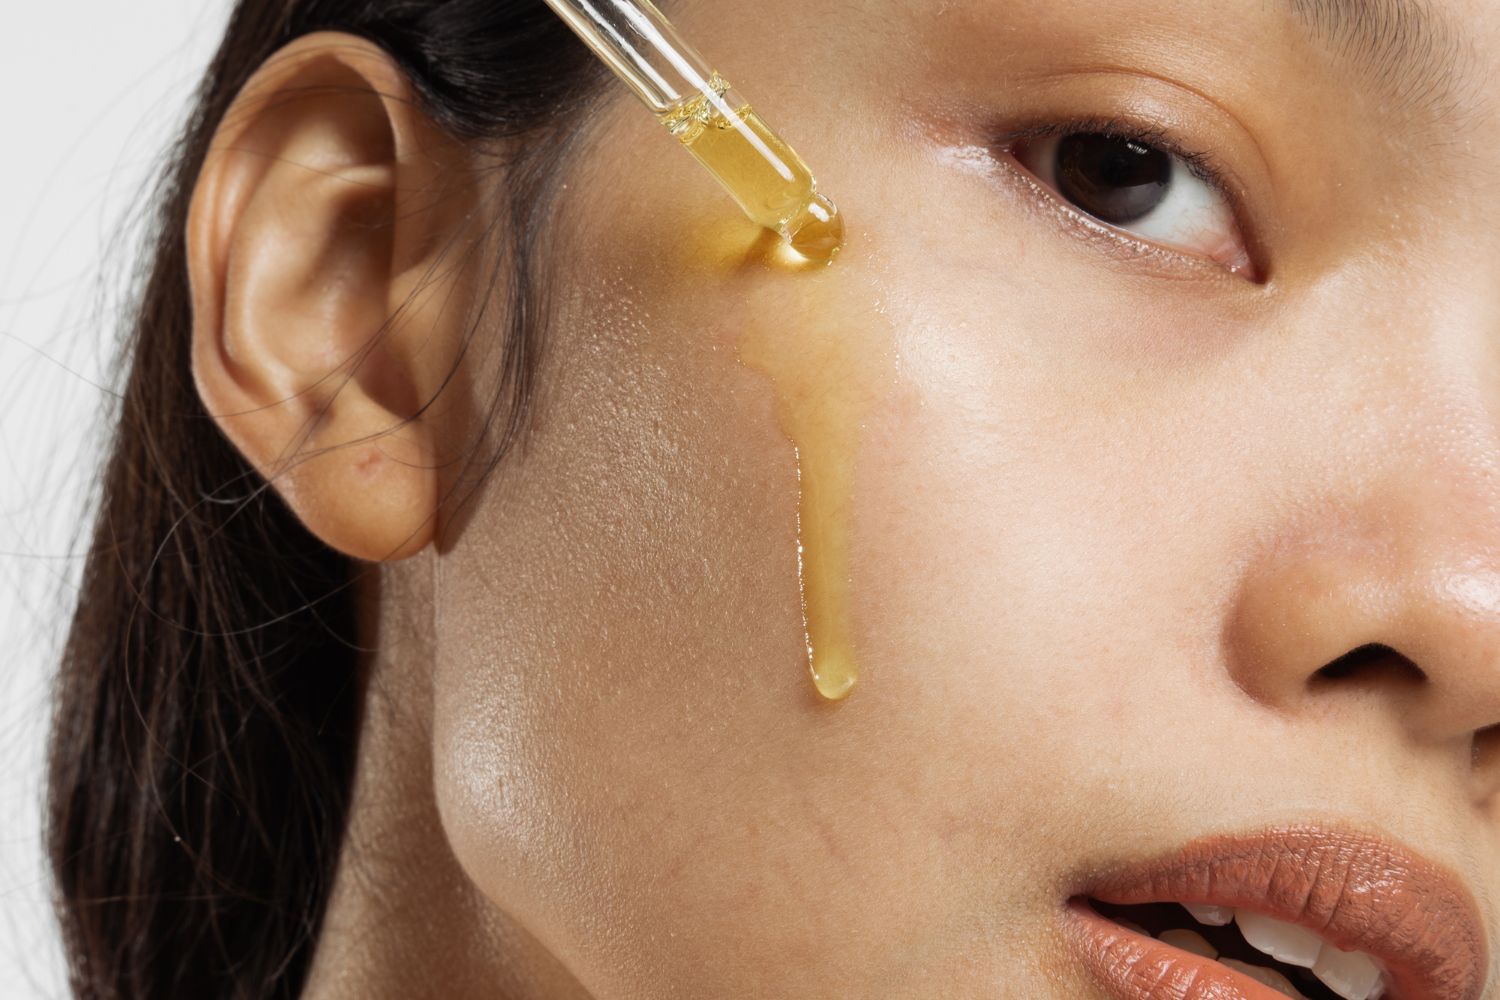 Closeup portrait of a woman applying Moroccan argan oil on face with a dropper